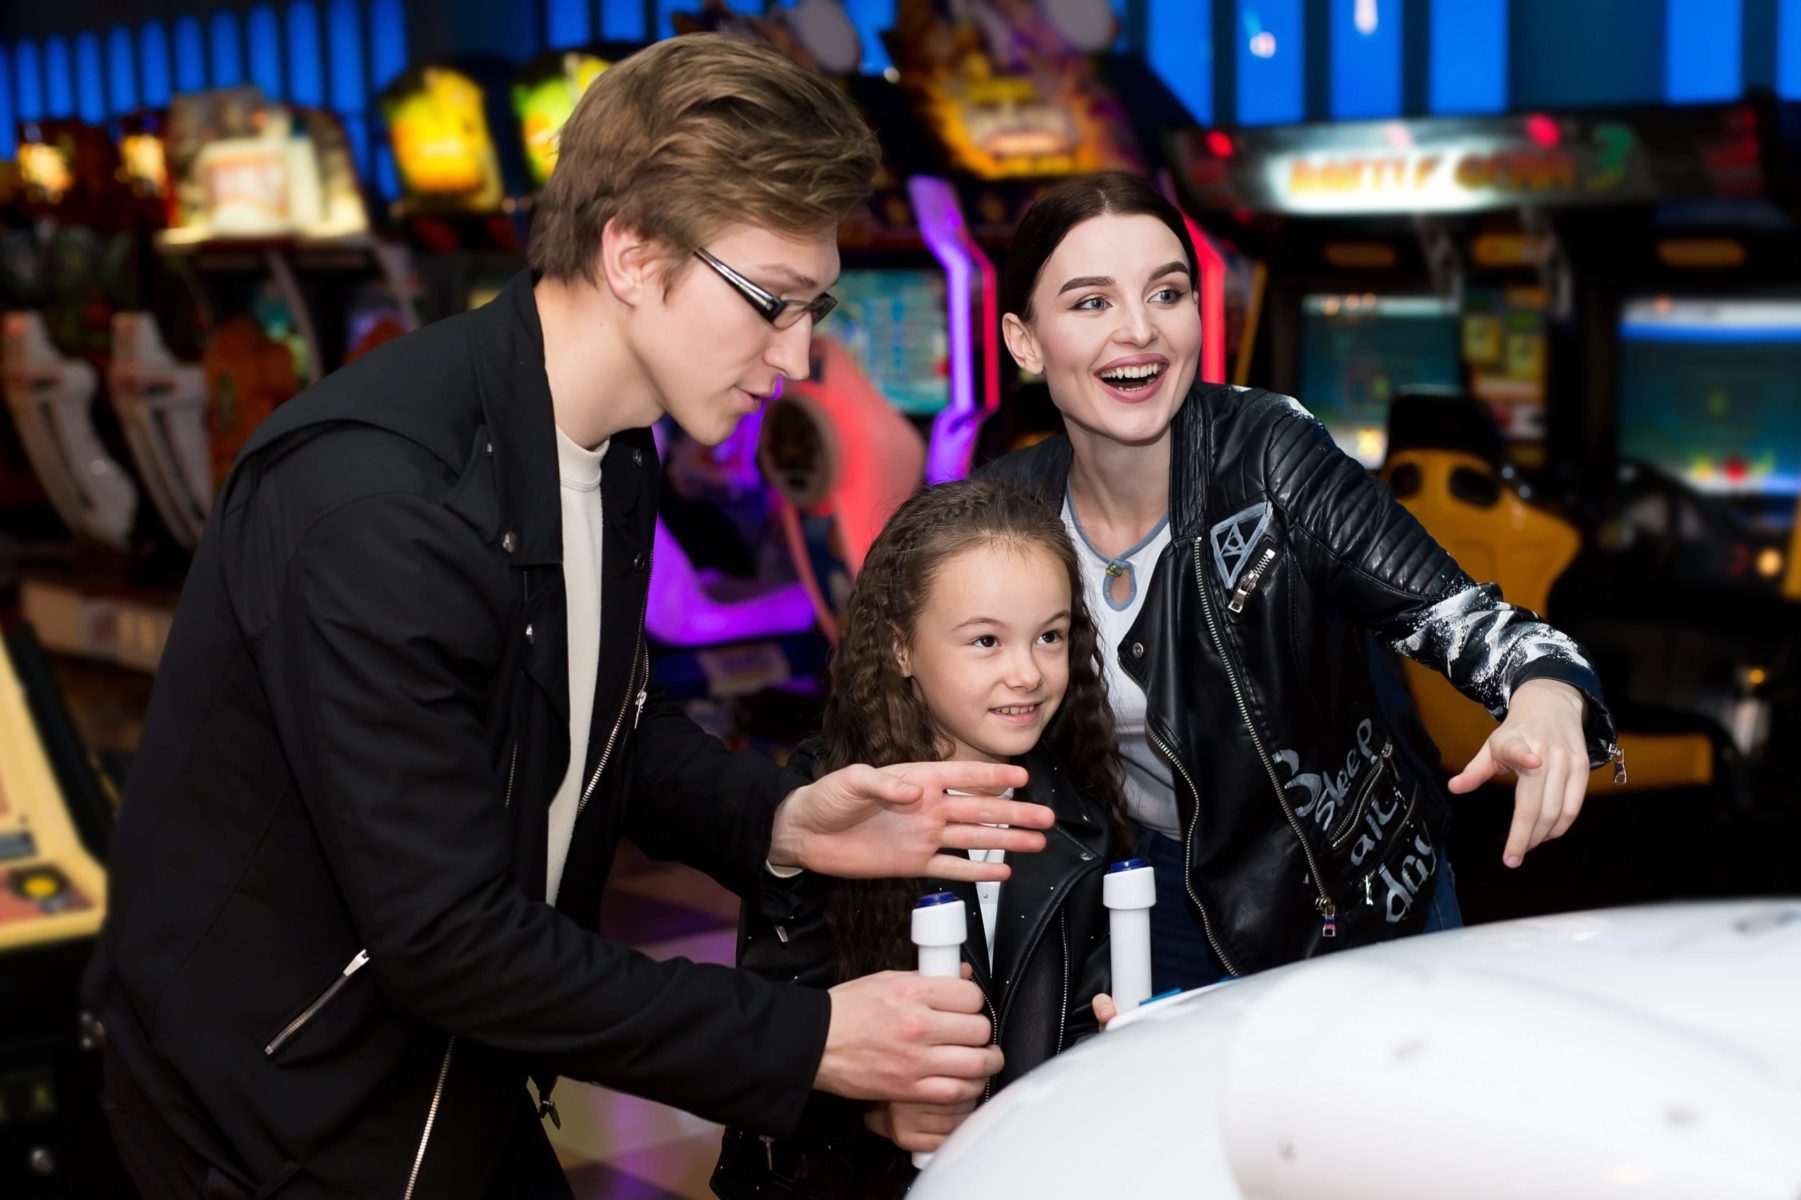 A father, mother and child playing at arcades in Oregon.